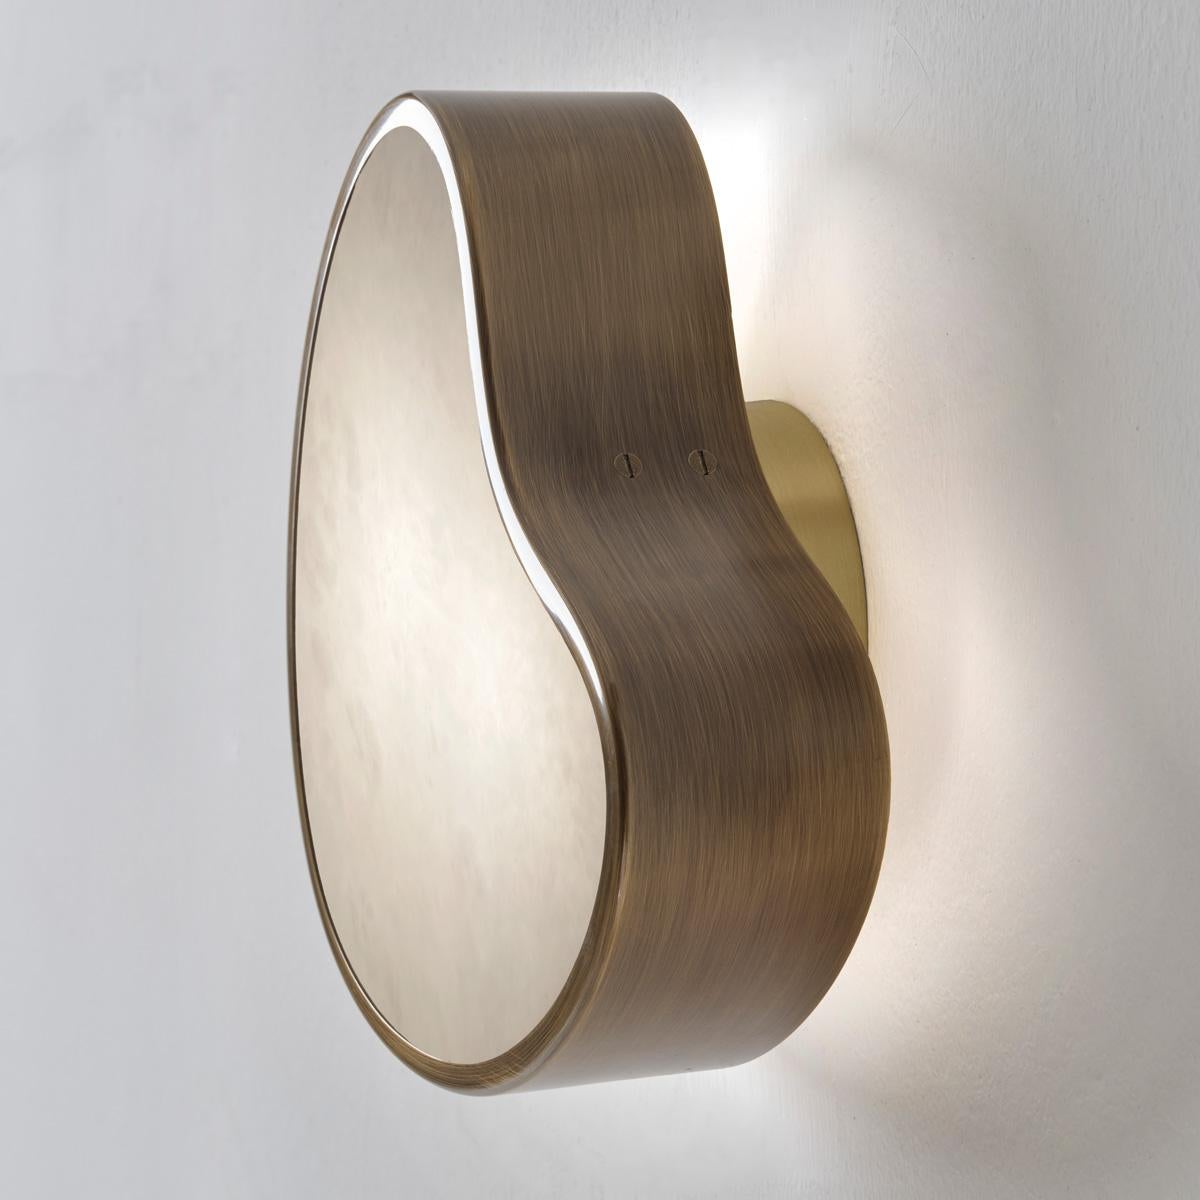 Cuore Wall Light by Gaspare Asaro. Backlit Version. Pewter Finish For Sale 2